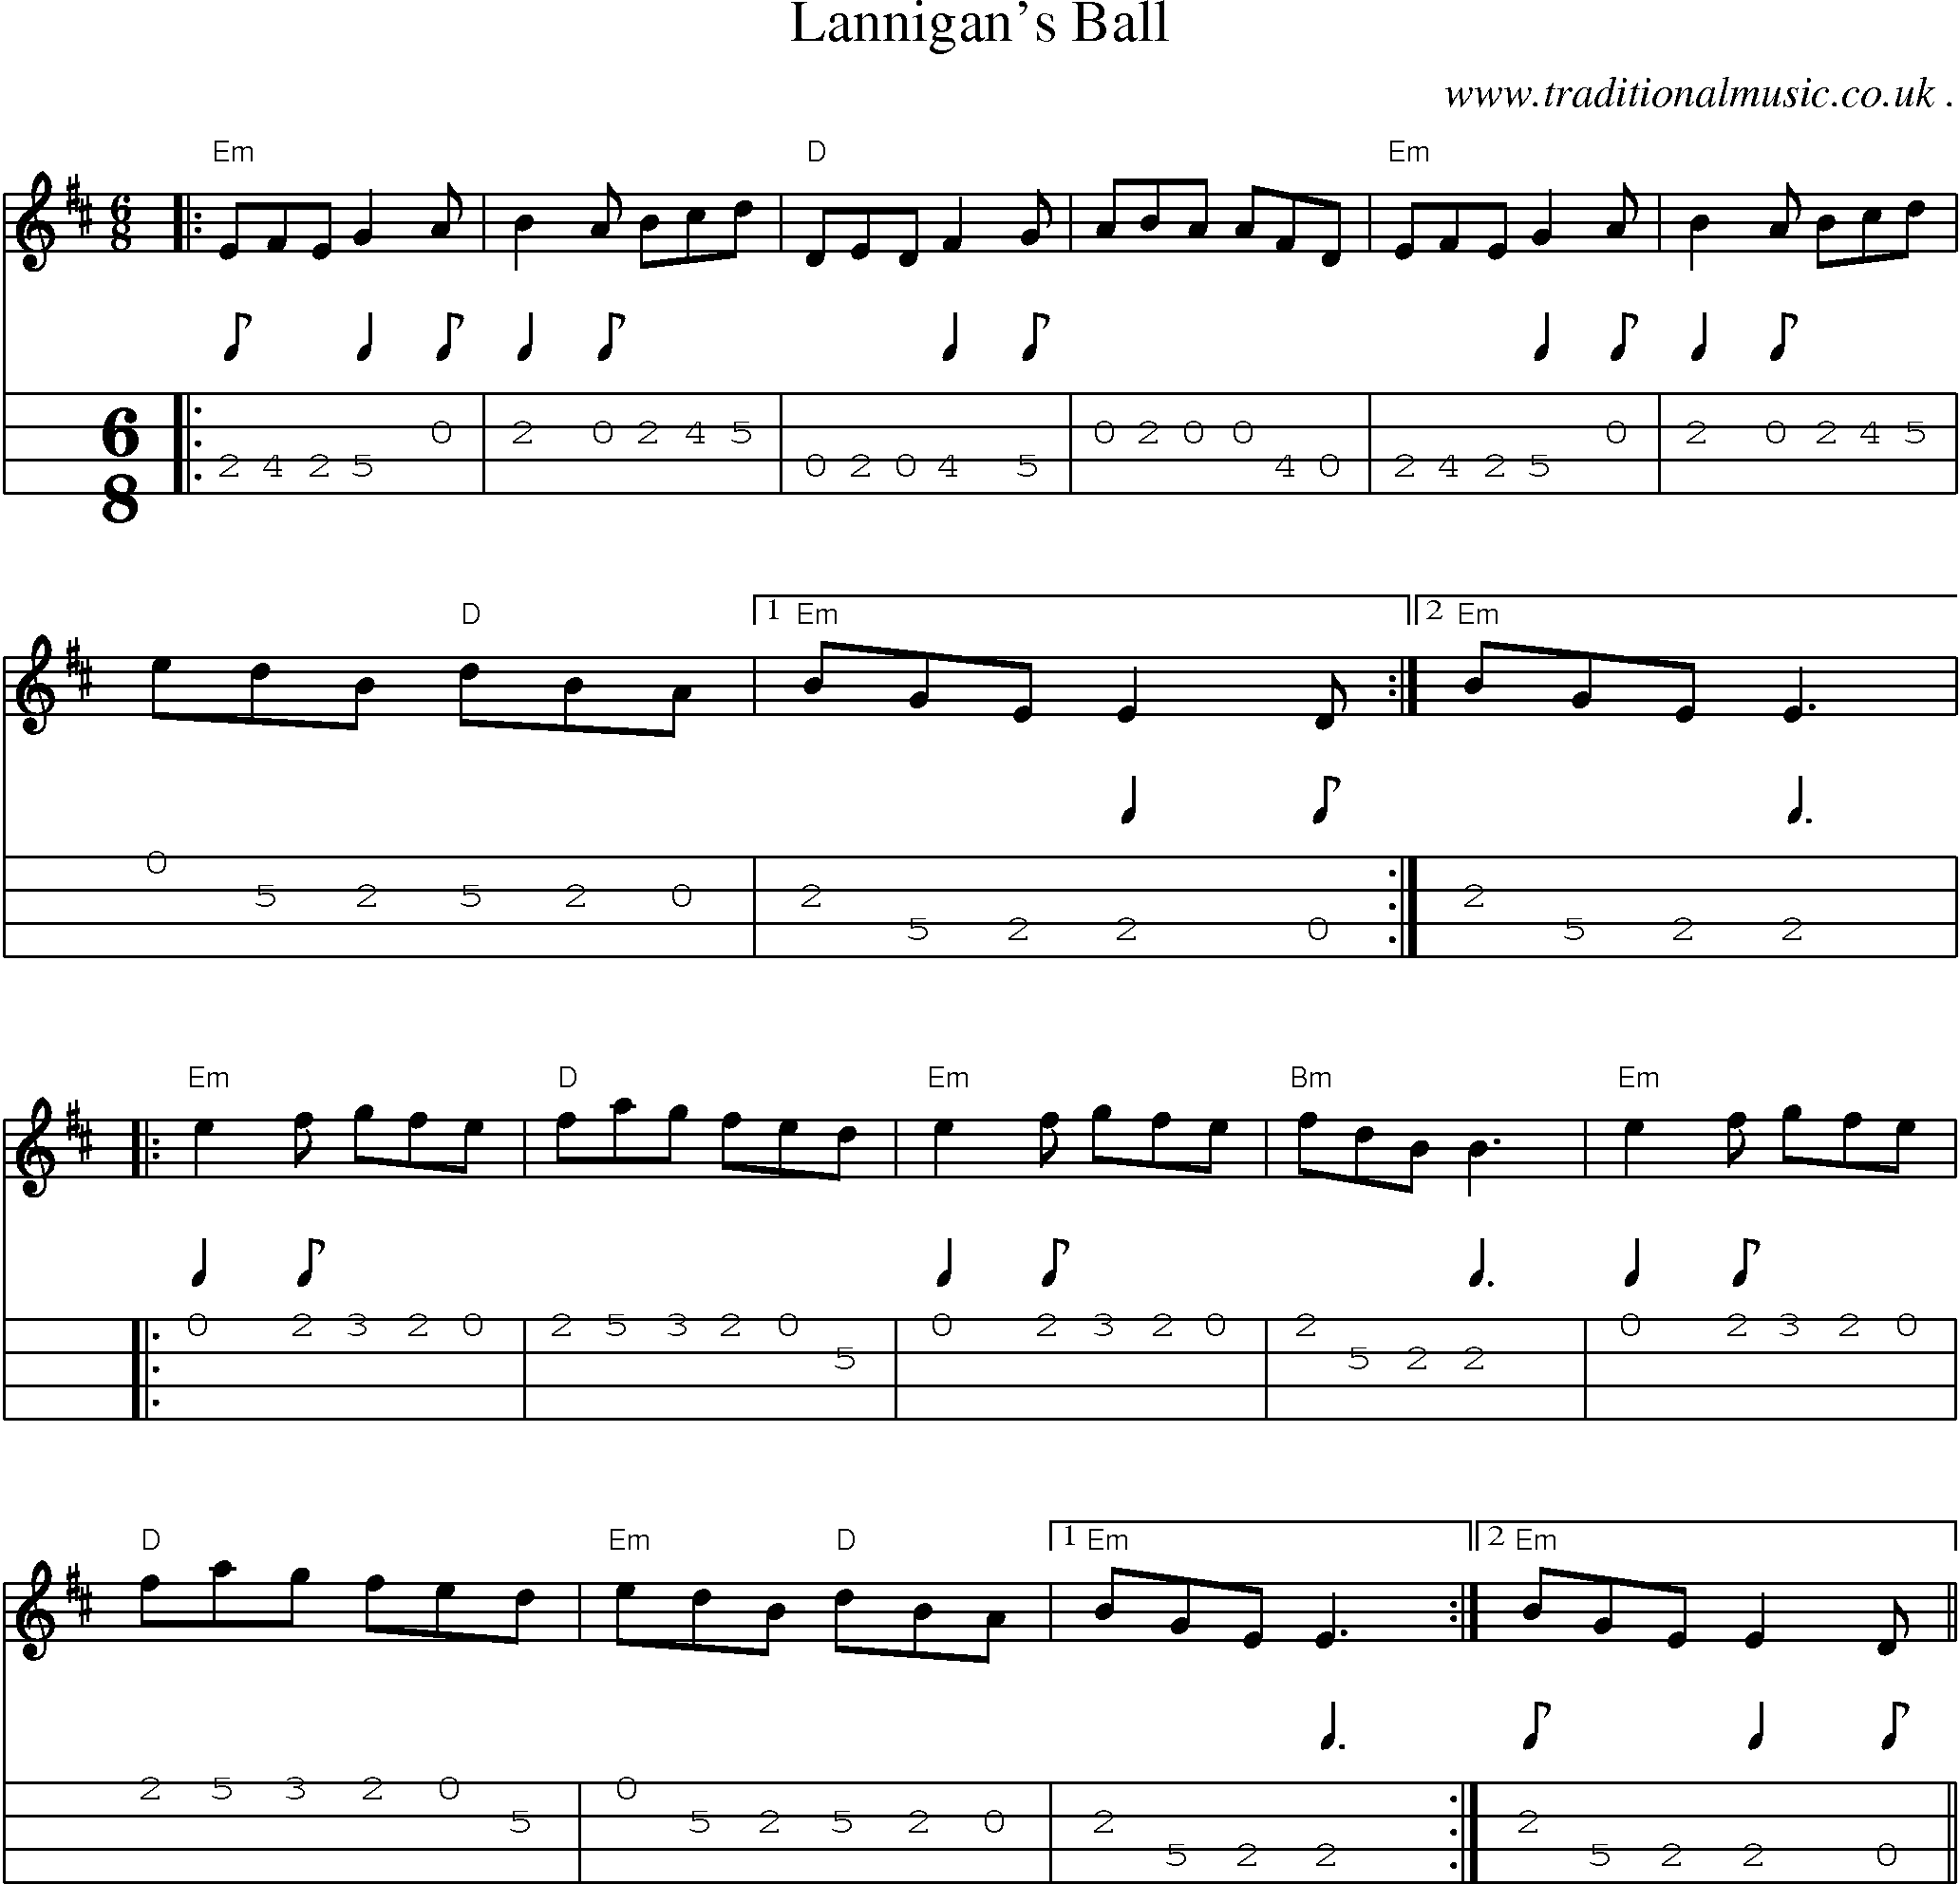 Music Score and Guitar Tabs for Lannigans Ball